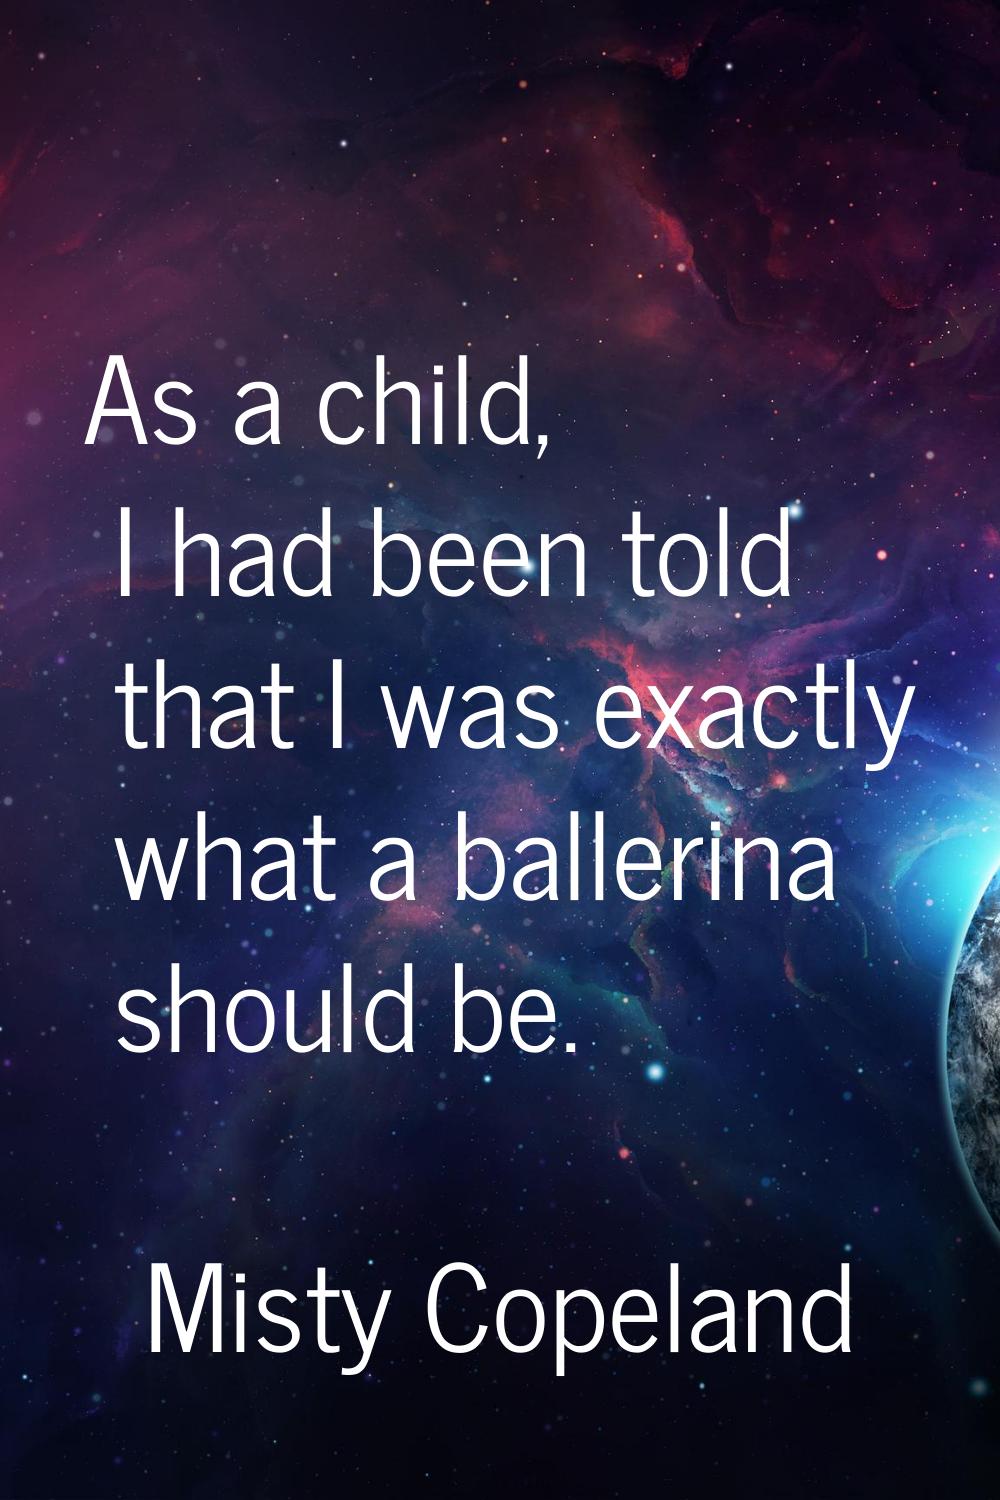 As a child, I had been told that I was exactly what a ballerina should be.